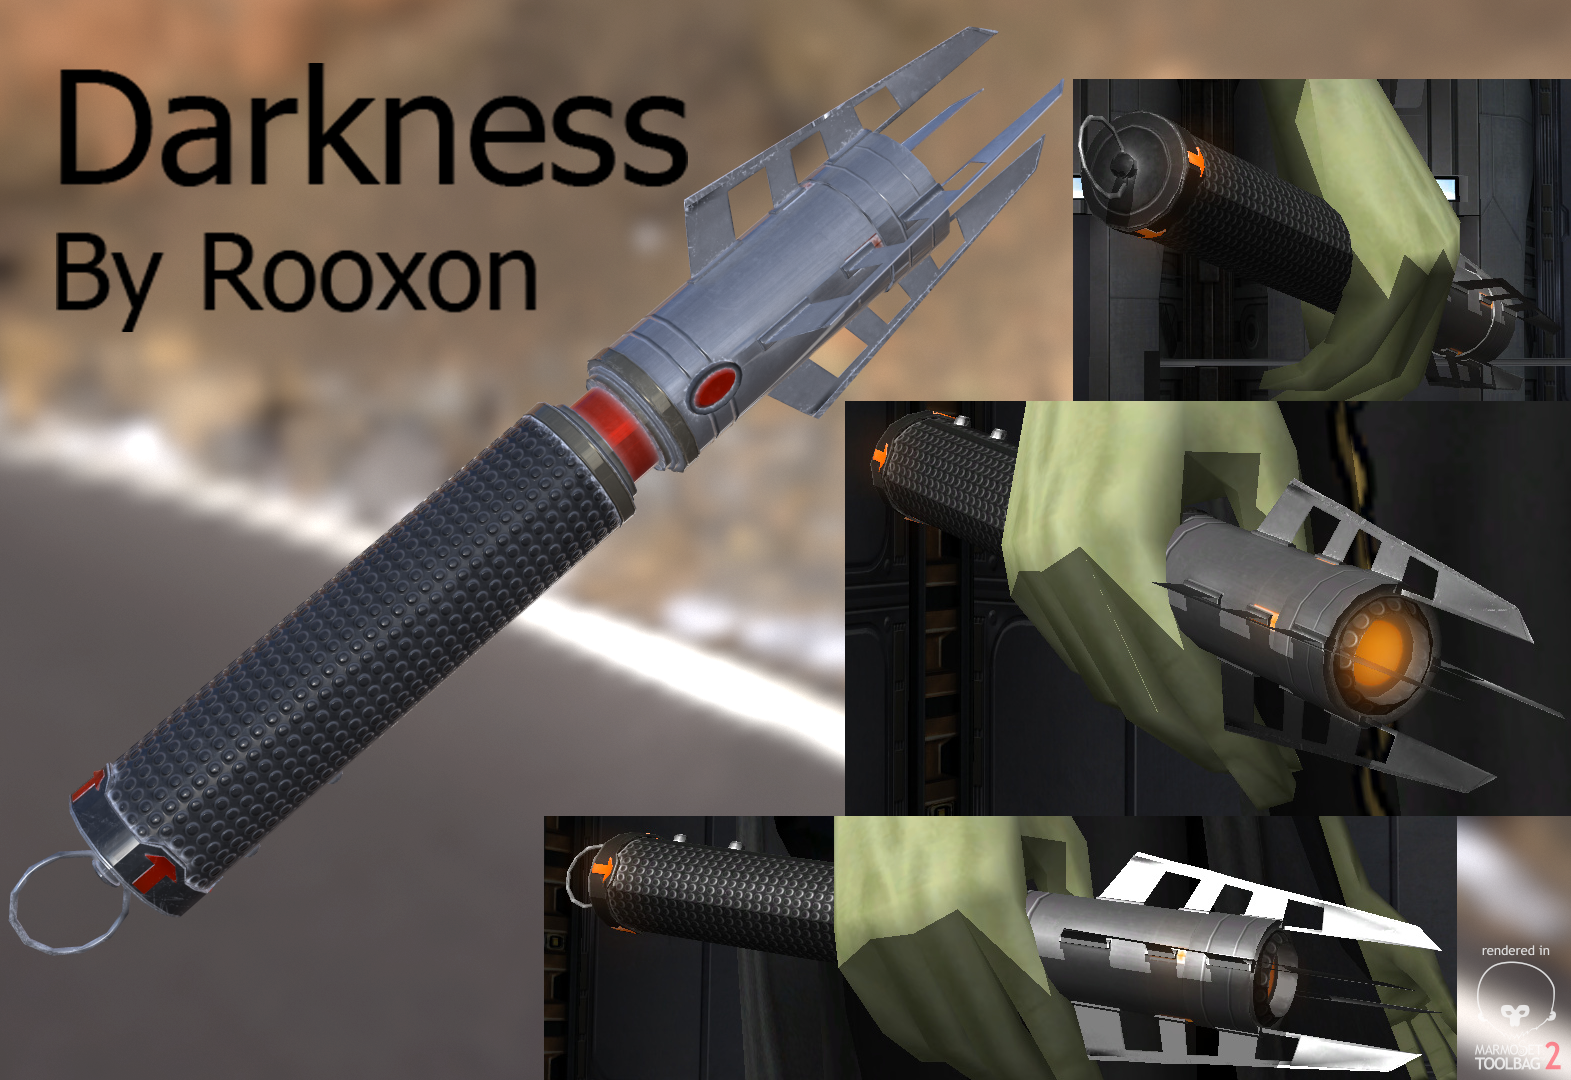 More information about "Darkness hilt"